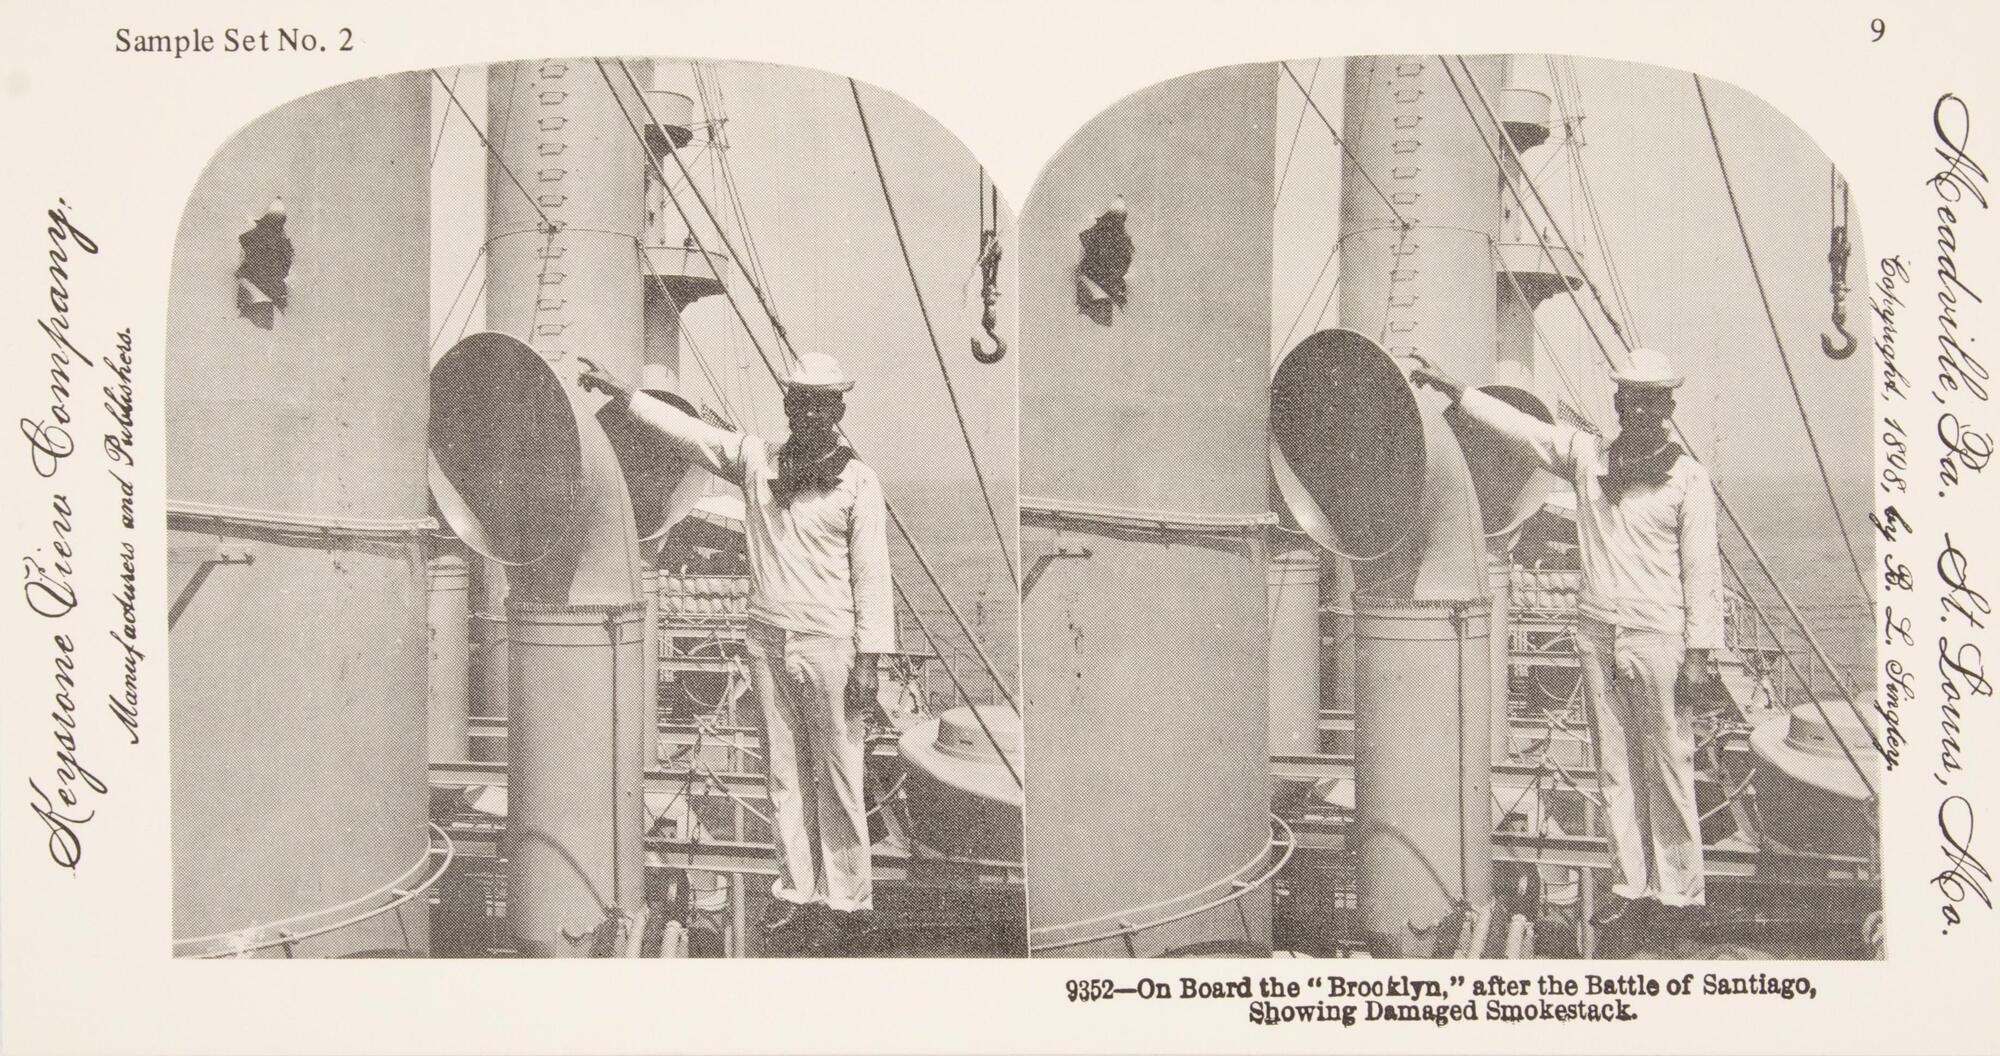 This black and white stereoscopic image features two images of a man in a white sailor uniform pointing to a hole in a smokestack.